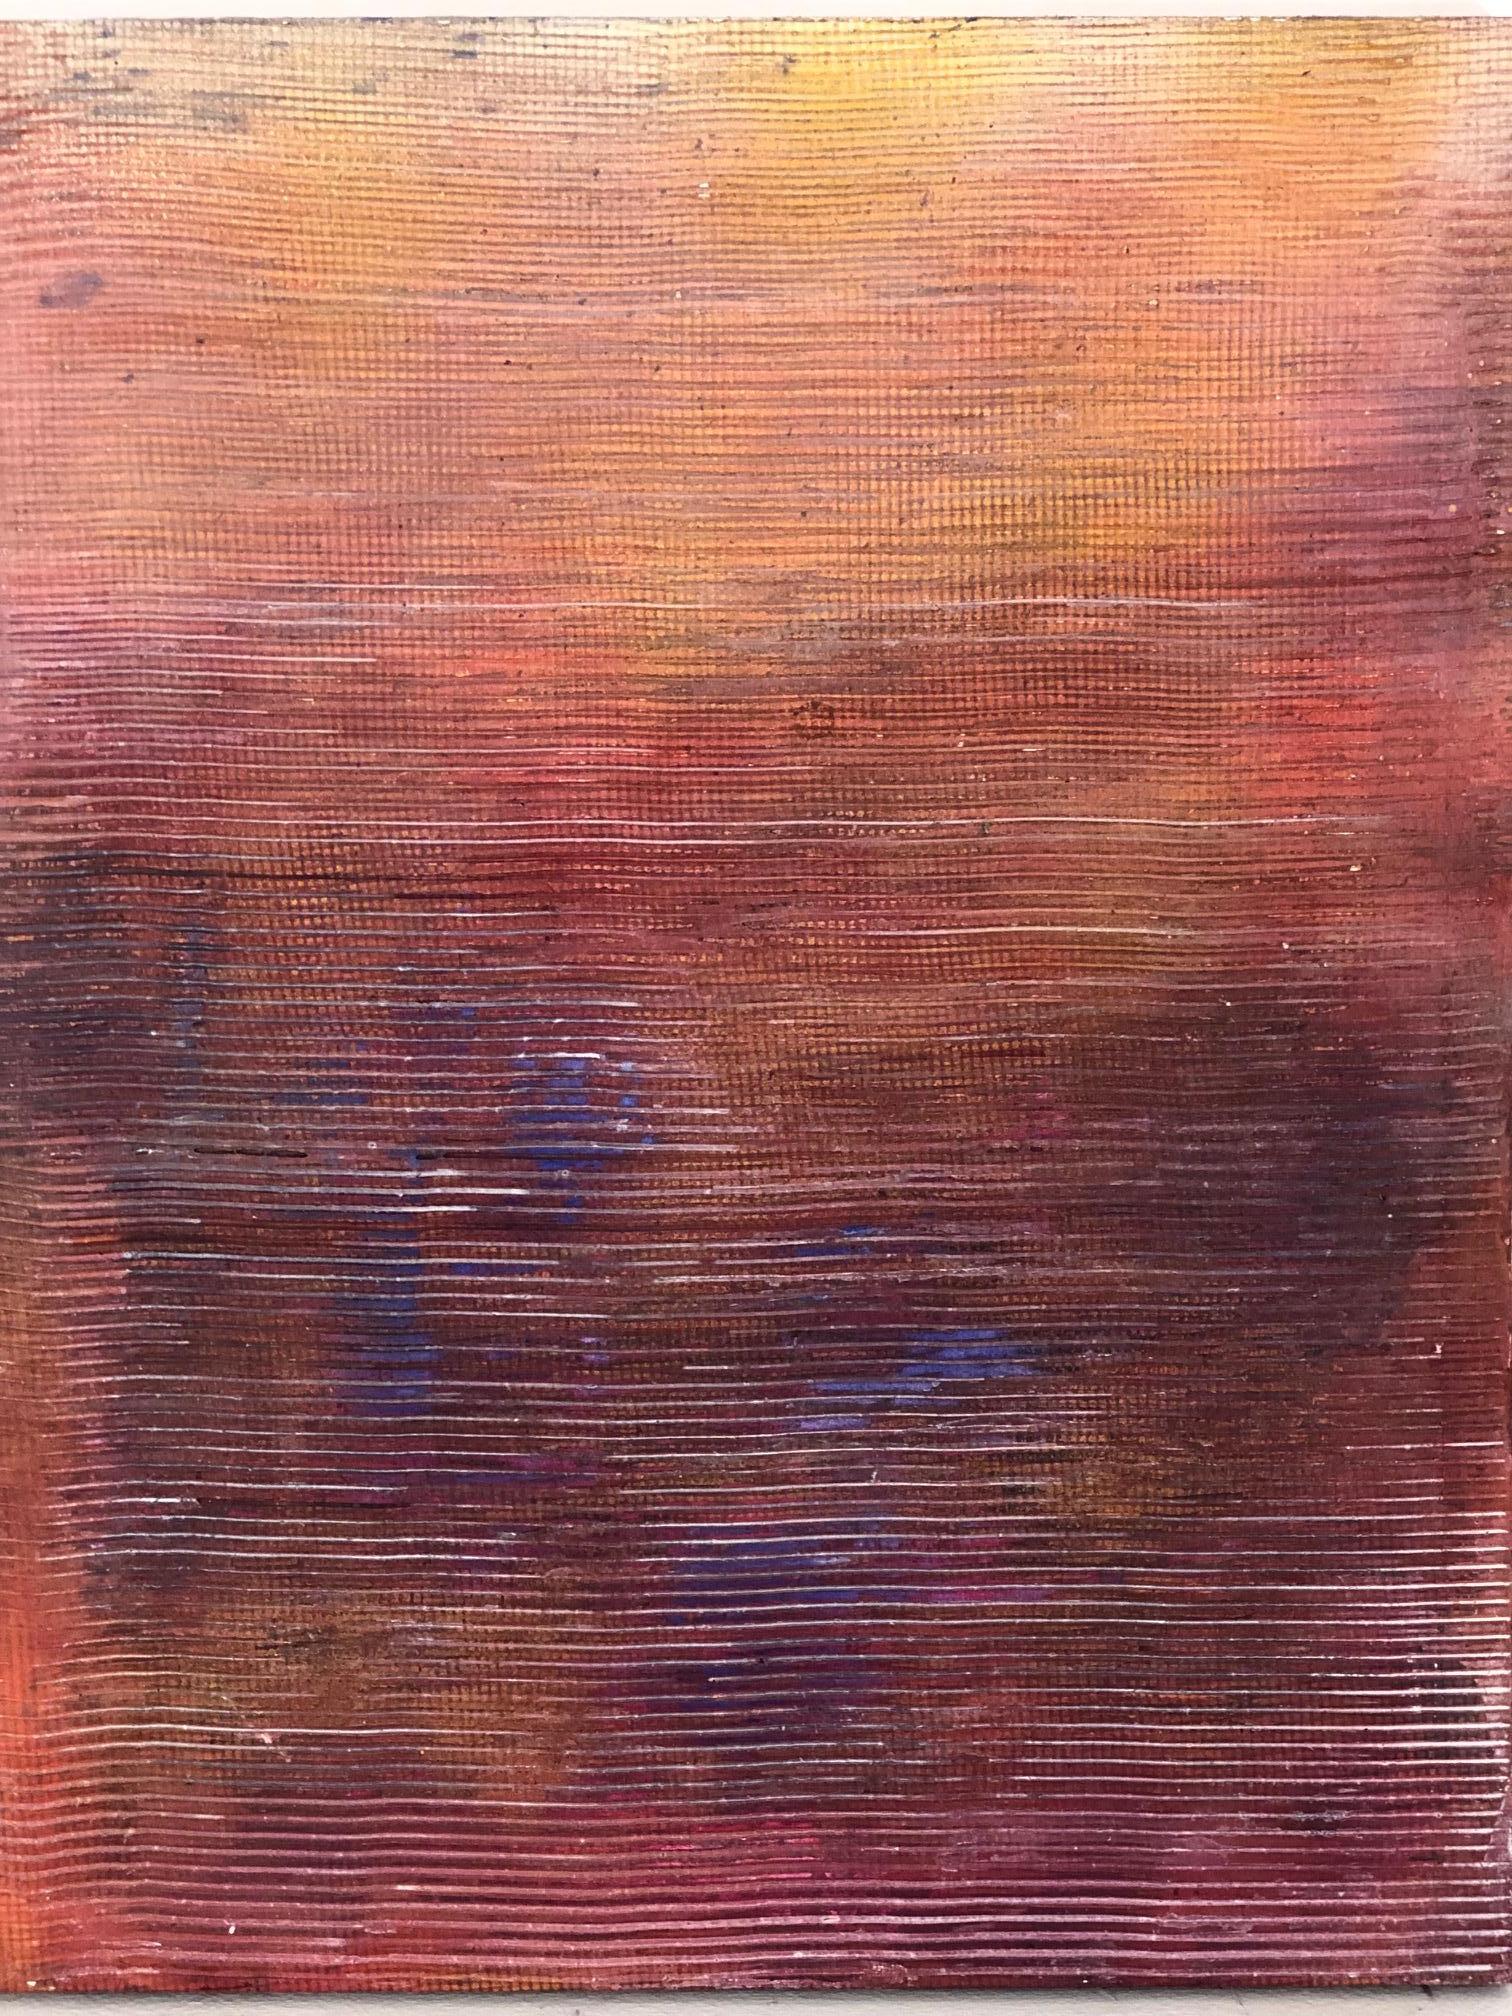 Augustus Cross Abstract Painting - "Untitled - Pink Striped" Textured colorful paintings in a grid or solo